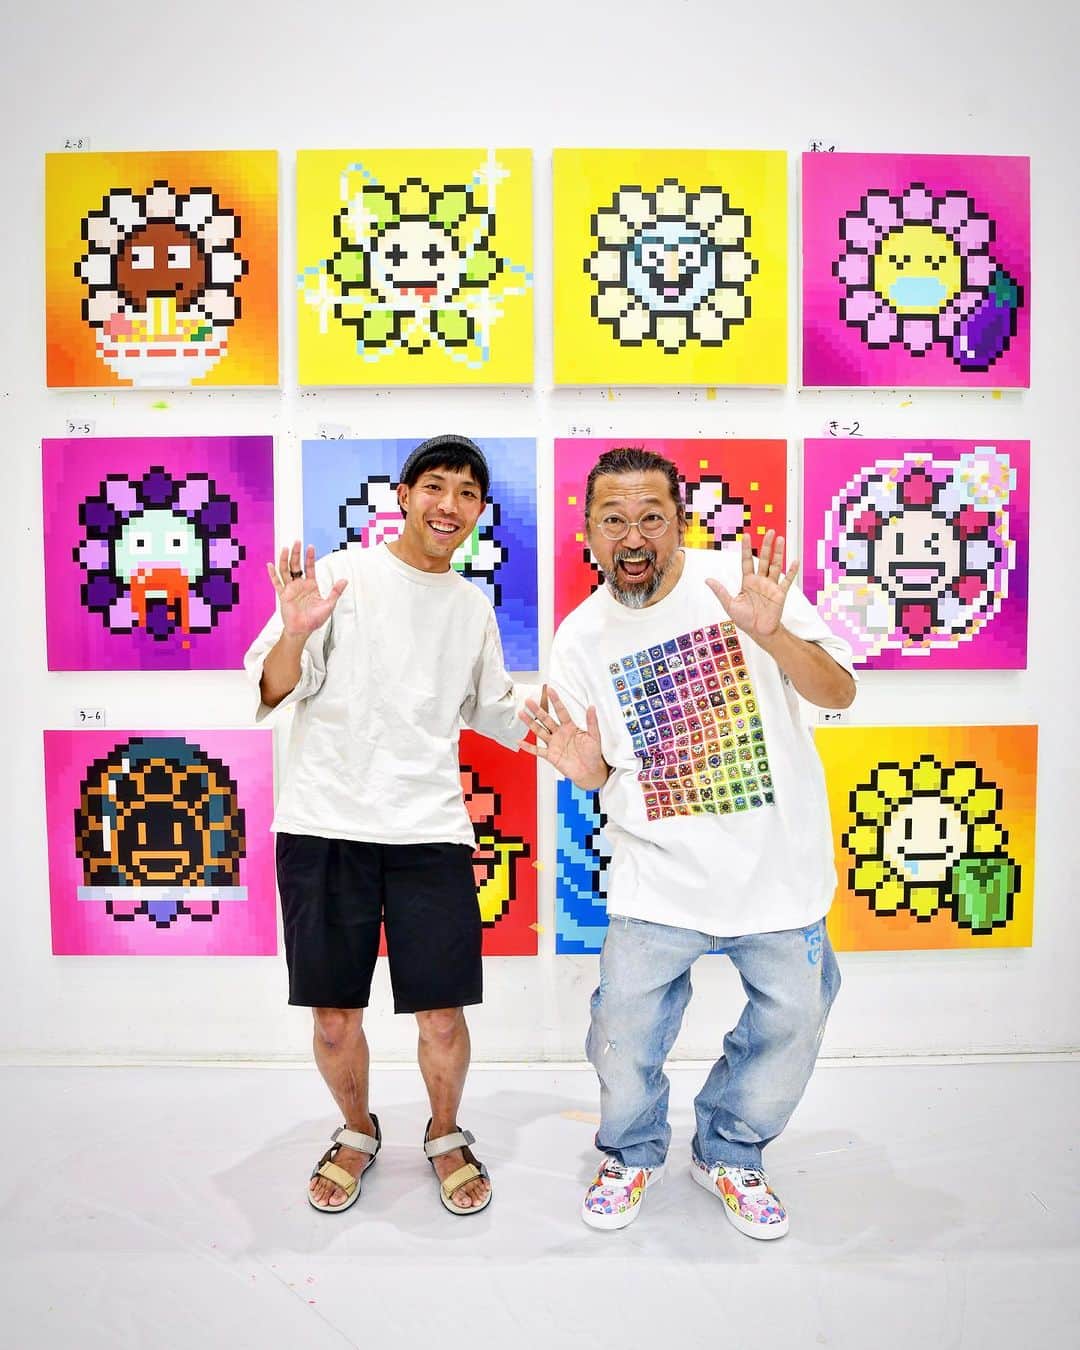 村上隆さんのインスタグラム写真 - (村上隆Instagram)「We have welcomed Mr. Shohei Sasaki to Kaikai Kiki Co., Ltd. as our COO (Chief Operating Officer) on July 1, 2023.  Immediately after the start of the pandemic in 2020, my company almost went bankrupt and I had to shut down various projects one after another. (I also closed down my large studio in New York; my assistant sent me a photo of the painting studio, which had been beautifully maintained for many years, turned into a vaccination center, which made me feel quite depressed). Since then, I have managed to survive with the help and guidance of many people, but it has been very difficult for me to manage an organization of 300 or so people while being an working artist myself. I have especially been anxious to find a professional management person to help me. Around September 2020, at an opening at my Kaikai Kiki Gallery, I was chatting with my friend and collector, Mr. Hirohisa Tamonoki @tamonoki (then CEO of a company listed on TSE Mothers), and asked him on a whim to help me manage my company. He kindly gave me some advice and recommended recruitment agencies without asking for any compensation. Then, in December of 2022, we had yet another big organizational crash, and Tamo-san introduced Mr. Shohei Sasaki to me. (Come to think of it, Shohei is the same as Shohei Otani's first name.)  Mr. Sasaki had previously had a brilliant career as CFO of CrowdWorks, Inc. For the past six months, he has kindly dealt with me, not thr easiest person to please, as well as my chaotic company run by tricky people, and his gentle personality and sharpness in business operations made me hope against hope that someone like him would join our company. Thankfully, I was now given the opportunity to welcome him as our COO. Now that we are aiming to expand the potential field of art, having started the development of NFT art and portable gaming device in 2022, I feel so pleased and excited to think that Mr. Sasaki will be able to help us realize new, achievable projects that could have a great impact on society. I hope you’ll keep an eye on Kaikai Kiki as we keep refreshing ourselves.」7月6日 15時45分 - takashipom